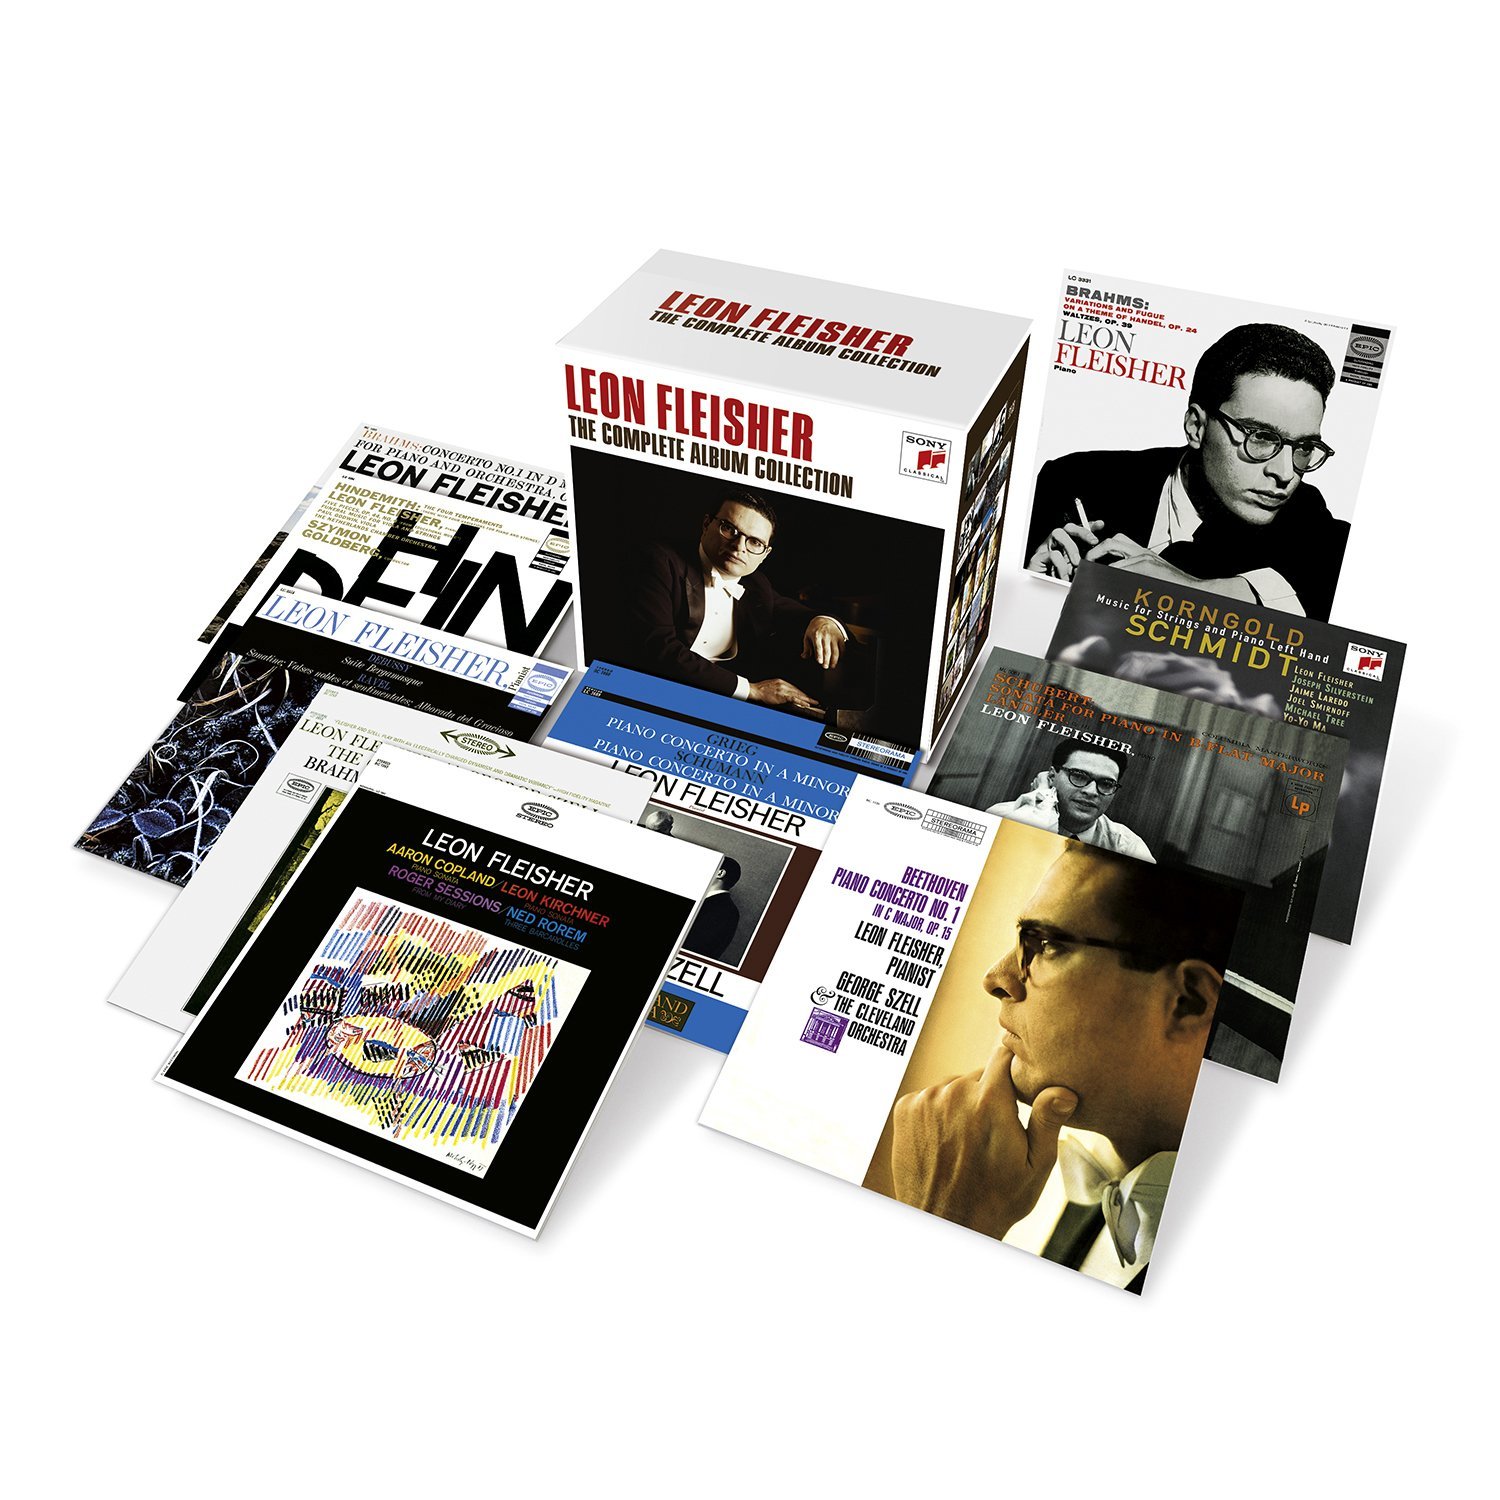 Complete Album Collection on Sony